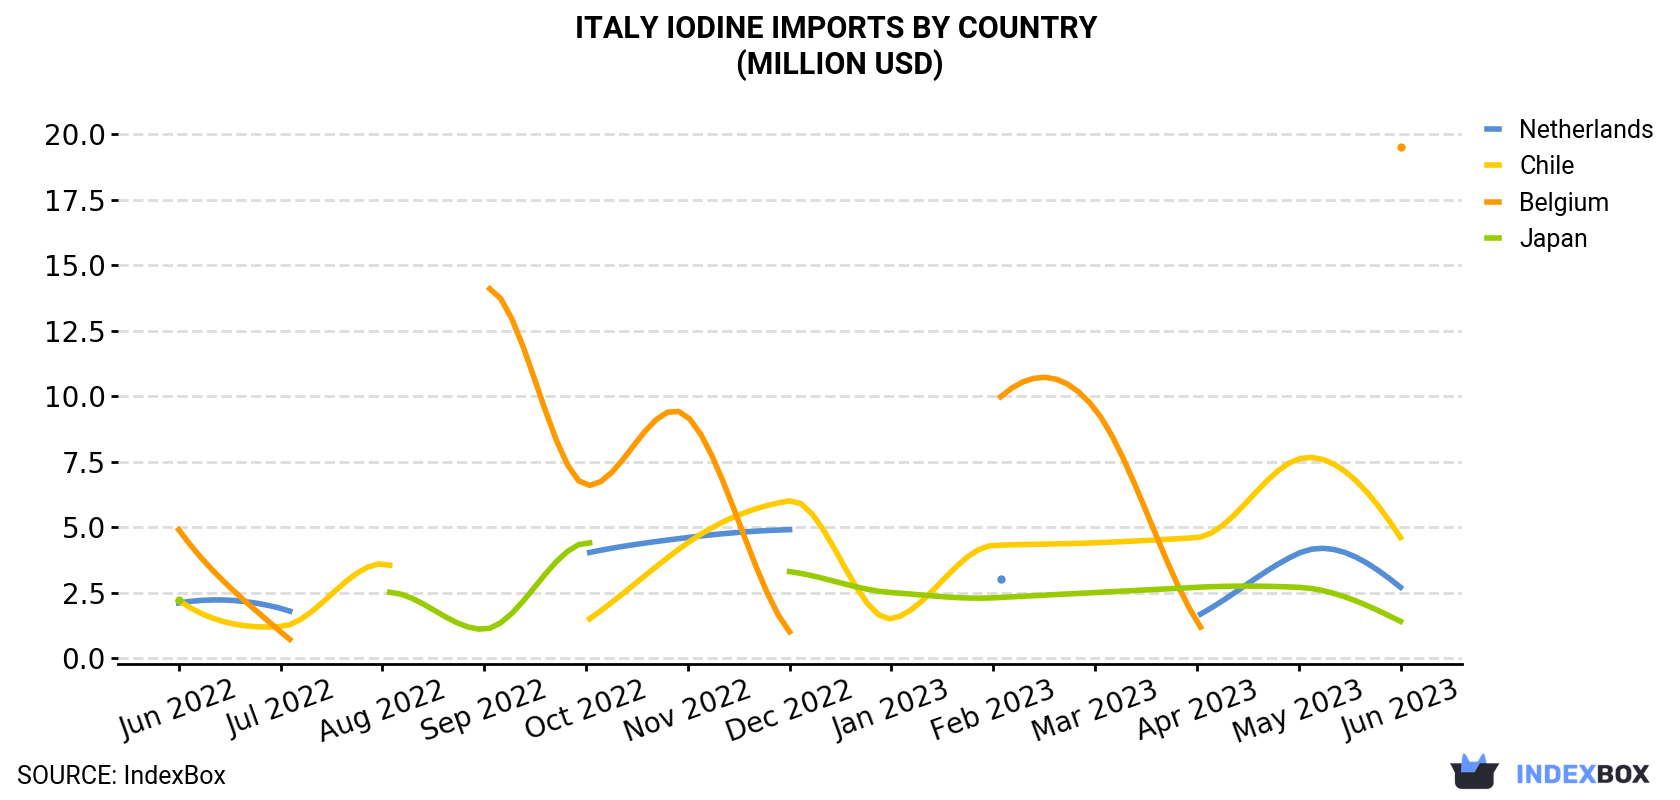 Italy Iodine Imports By Country (Million USD)